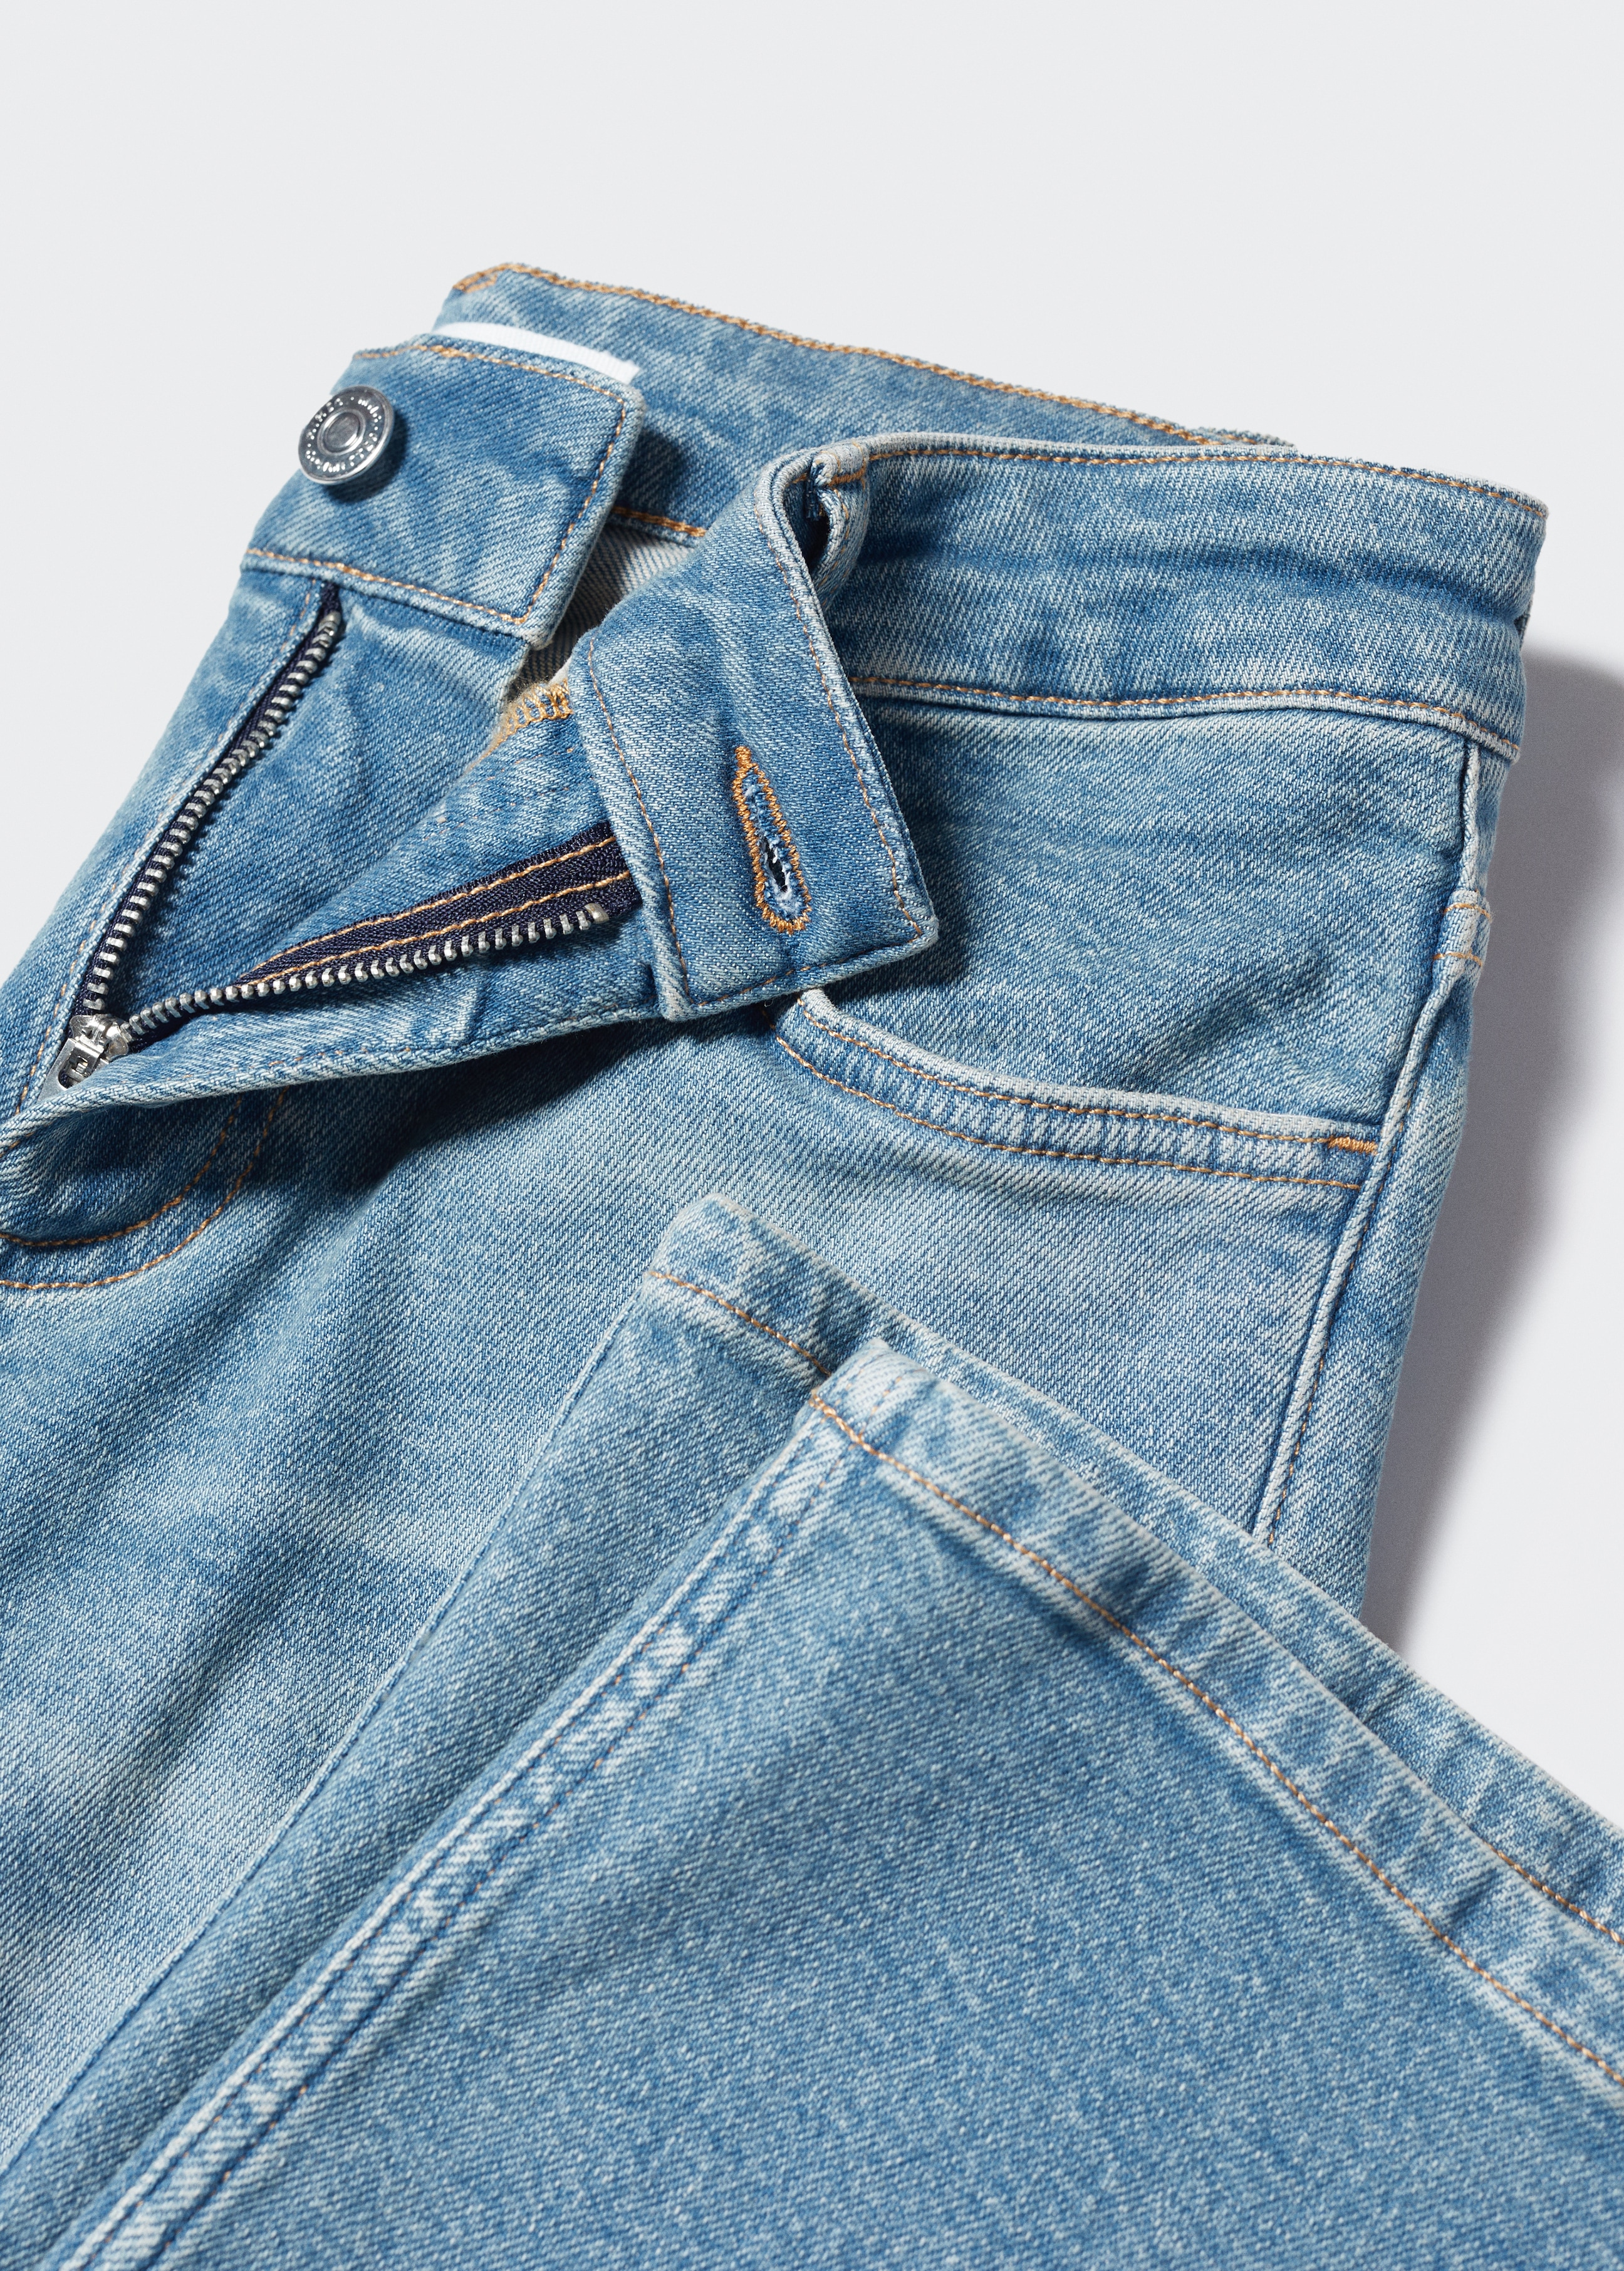 Low-rise flared jeans - Details of the article 8